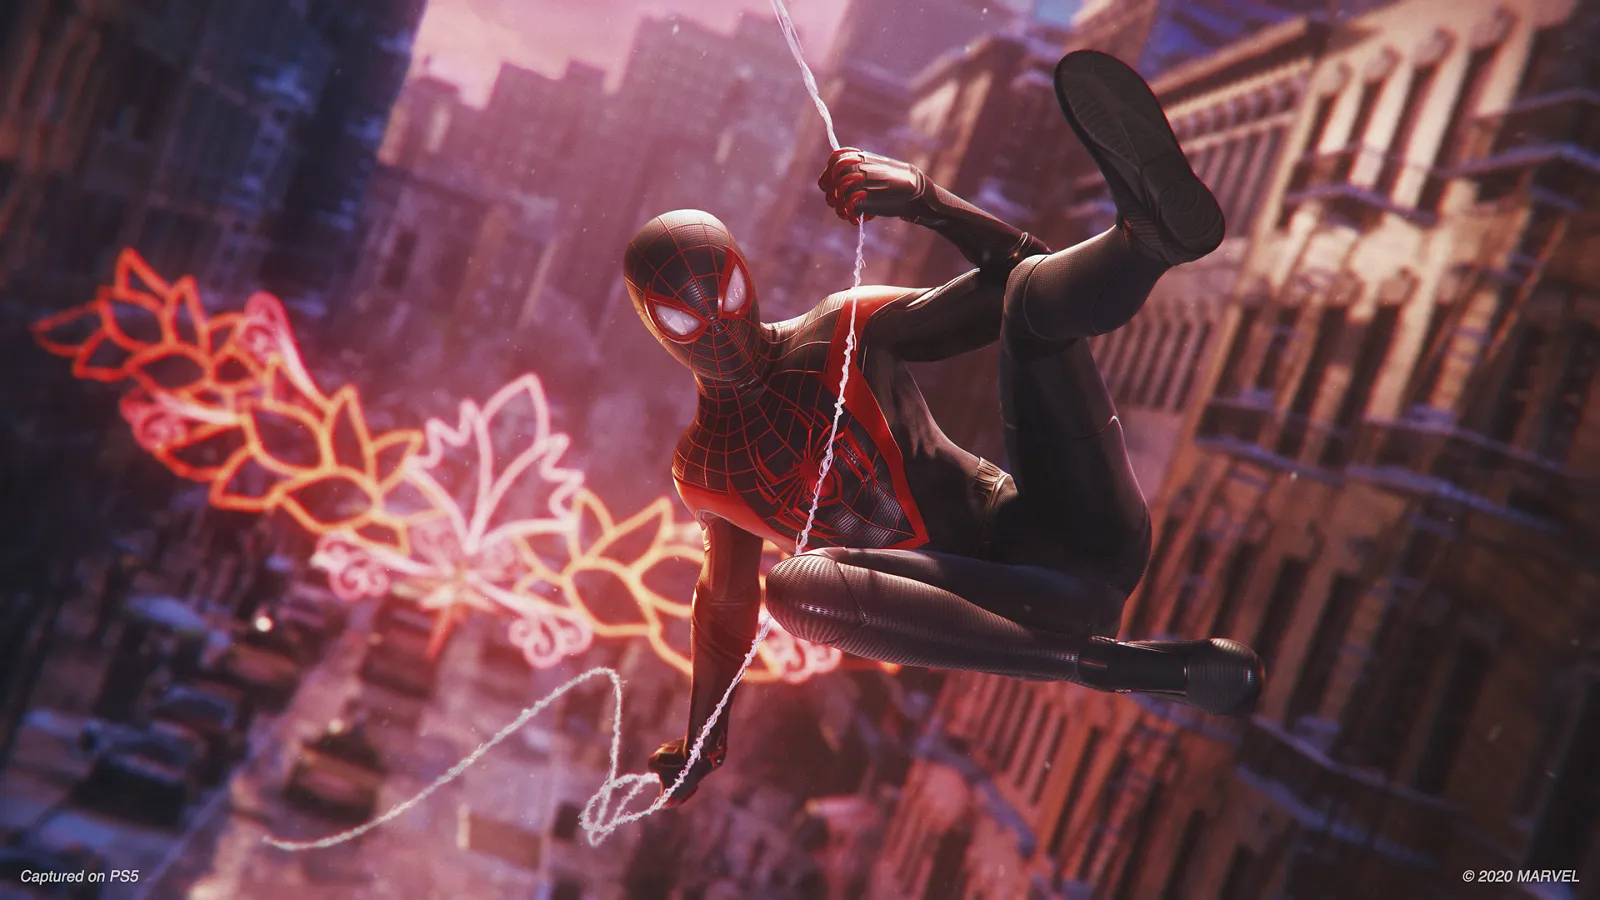 Marvel's Spider-Man: Miles Morales Ultimate Edition